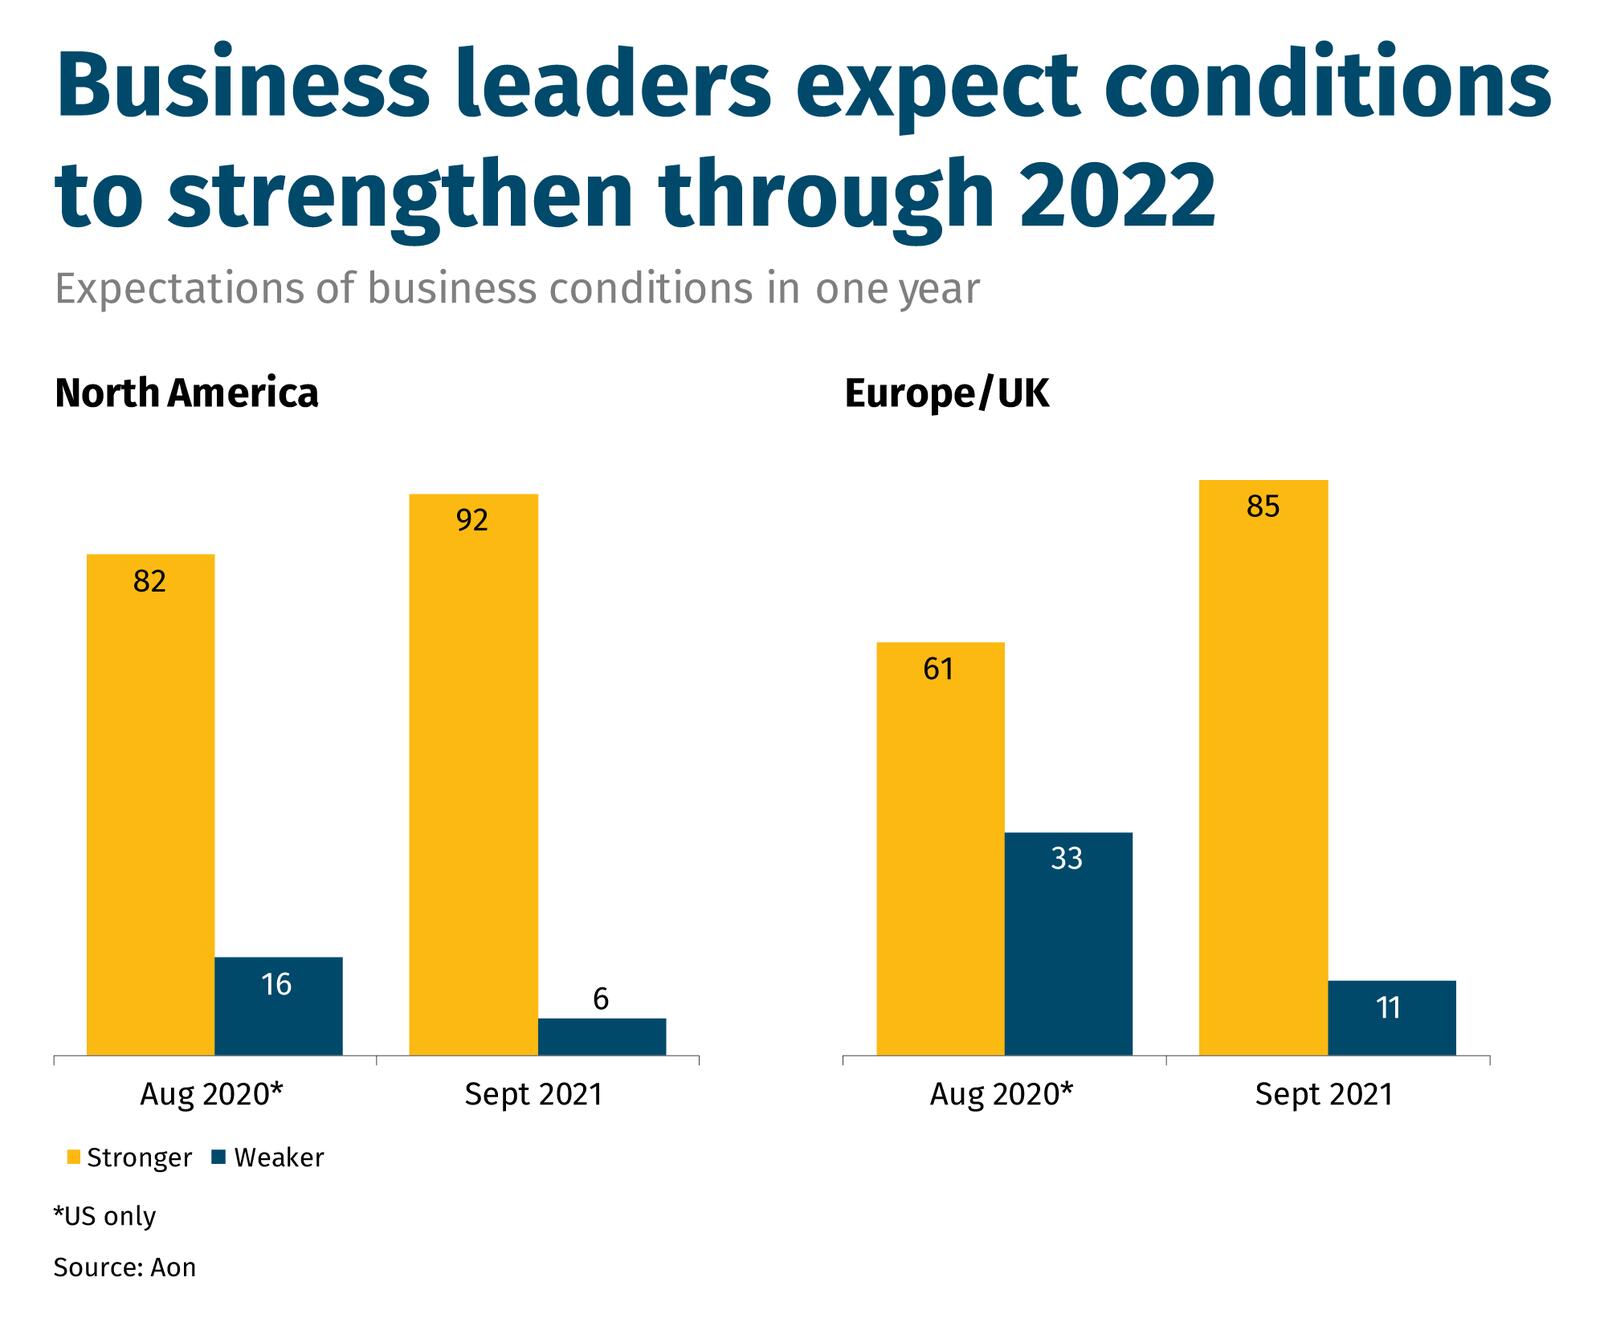 Business leaders expect conditions to strengthen through 2022